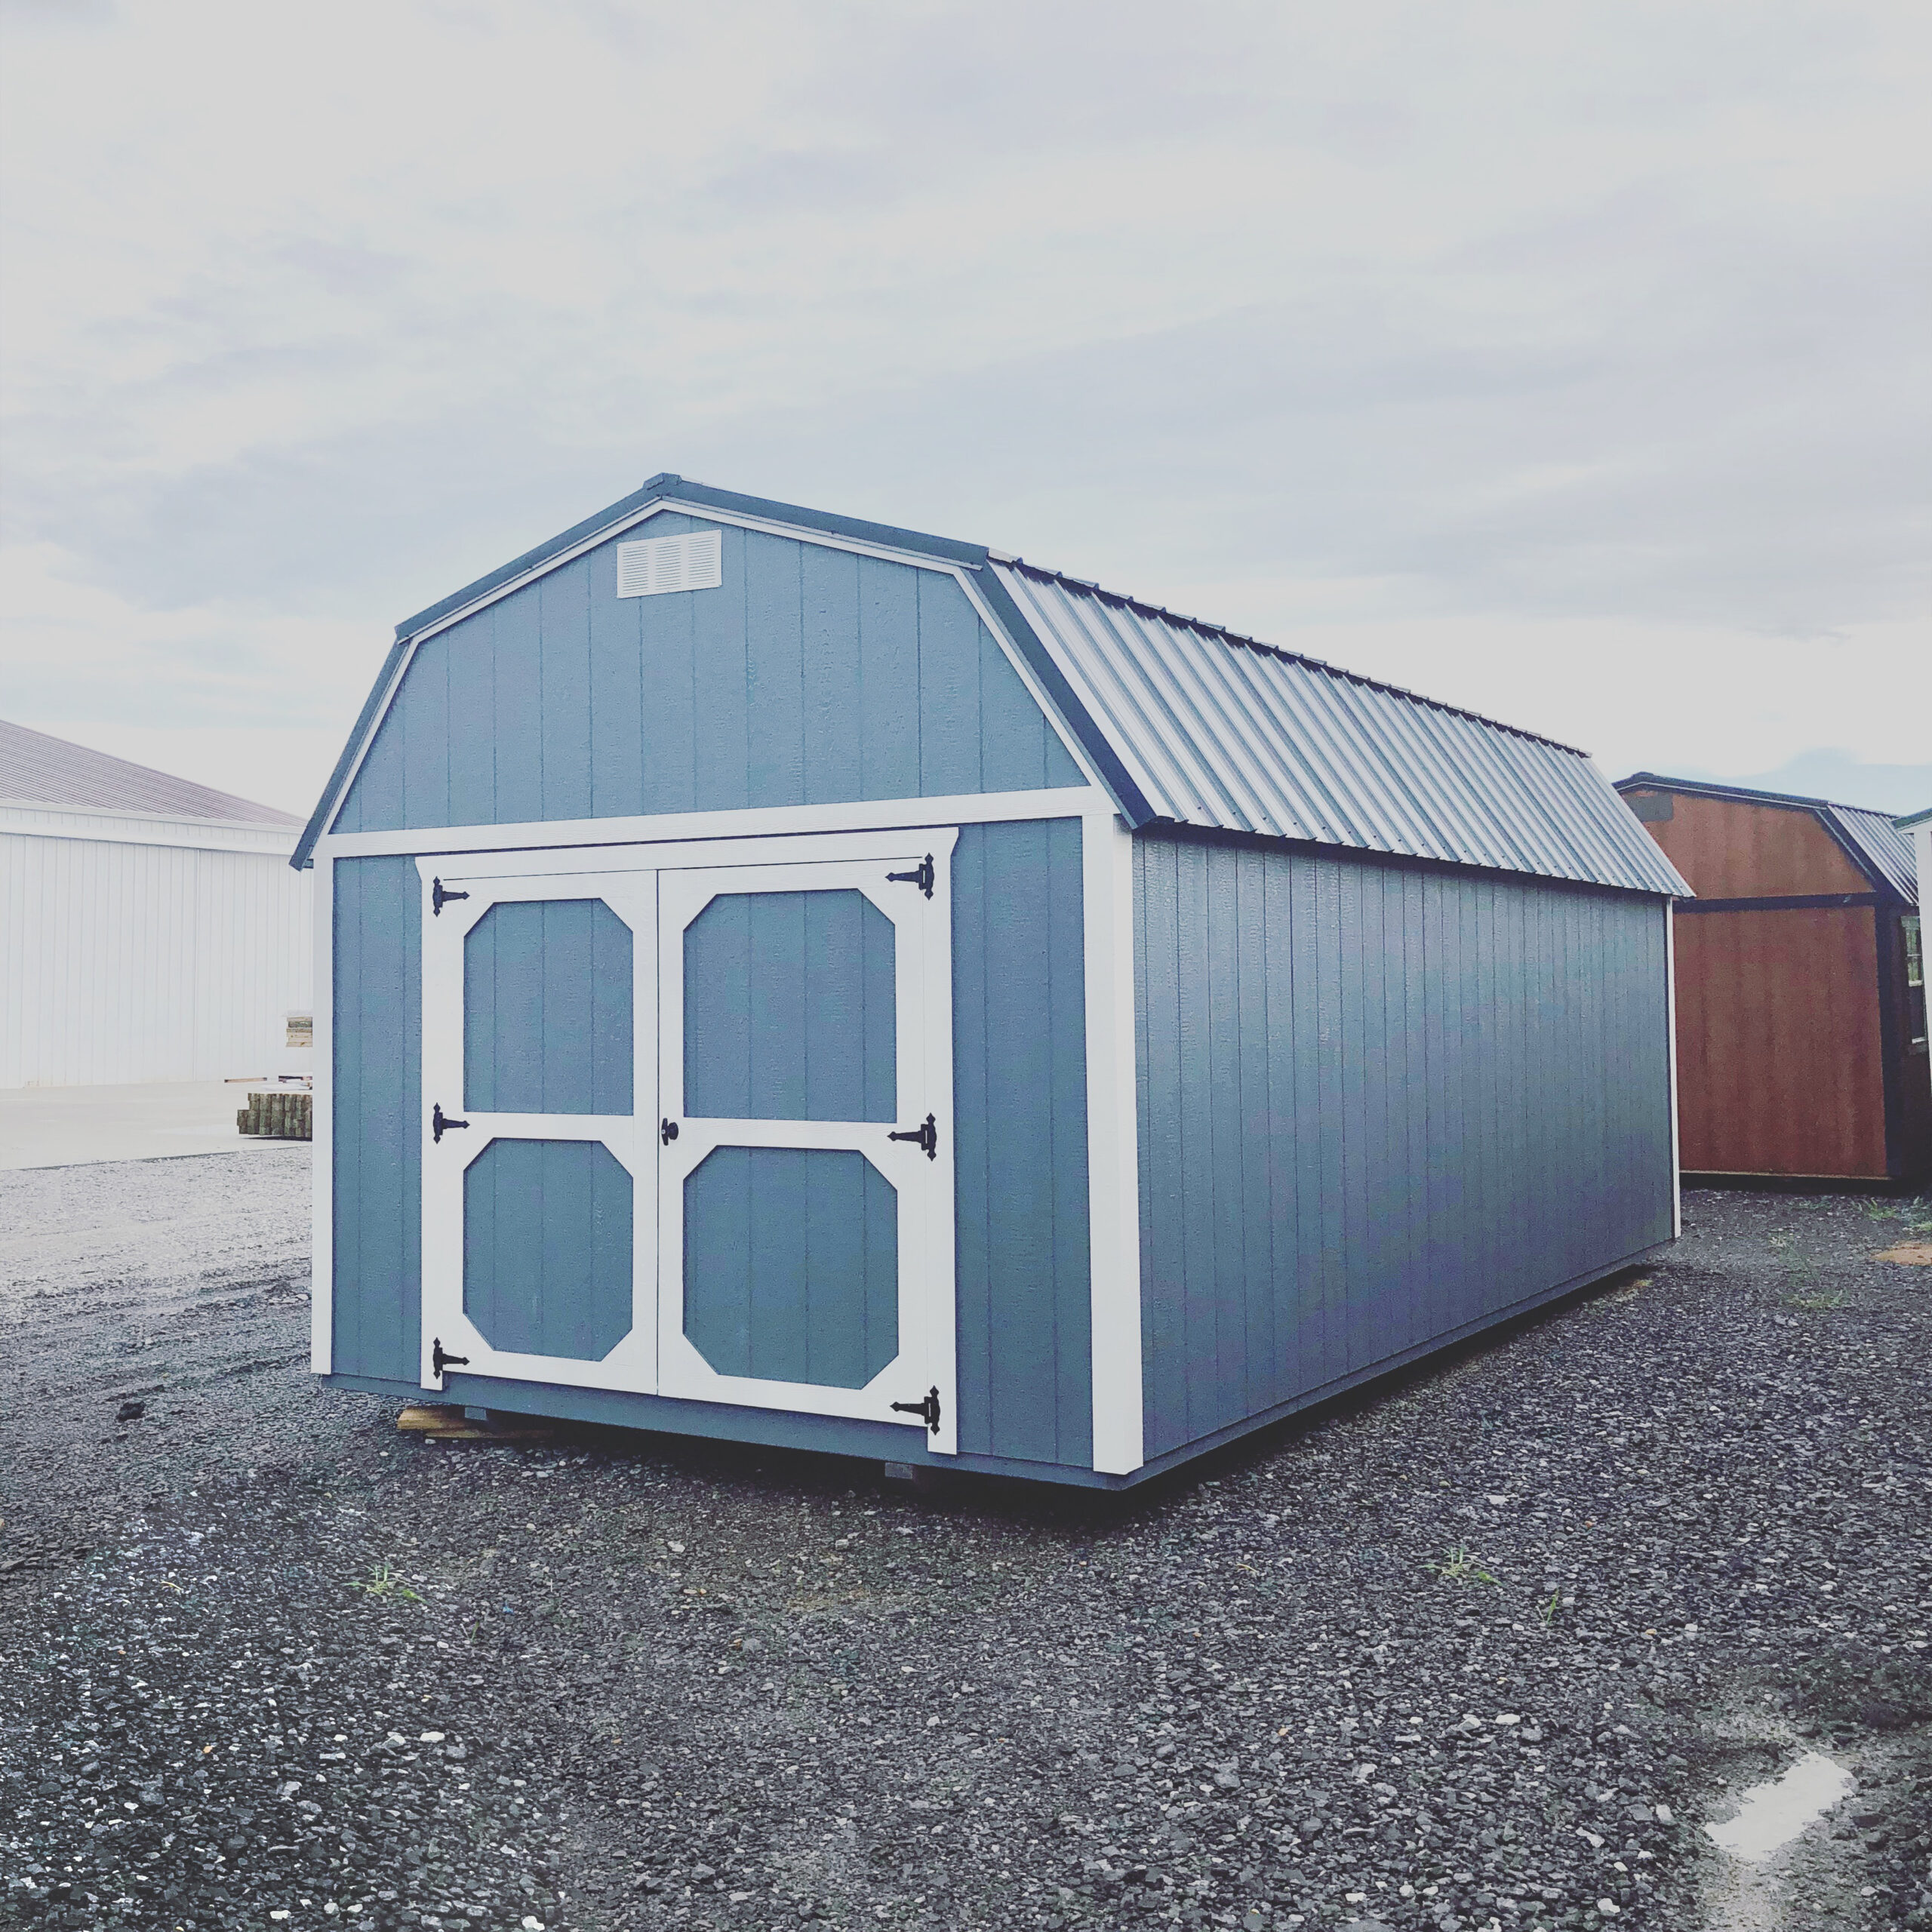 Blue lofted barn with white trim and metal roof